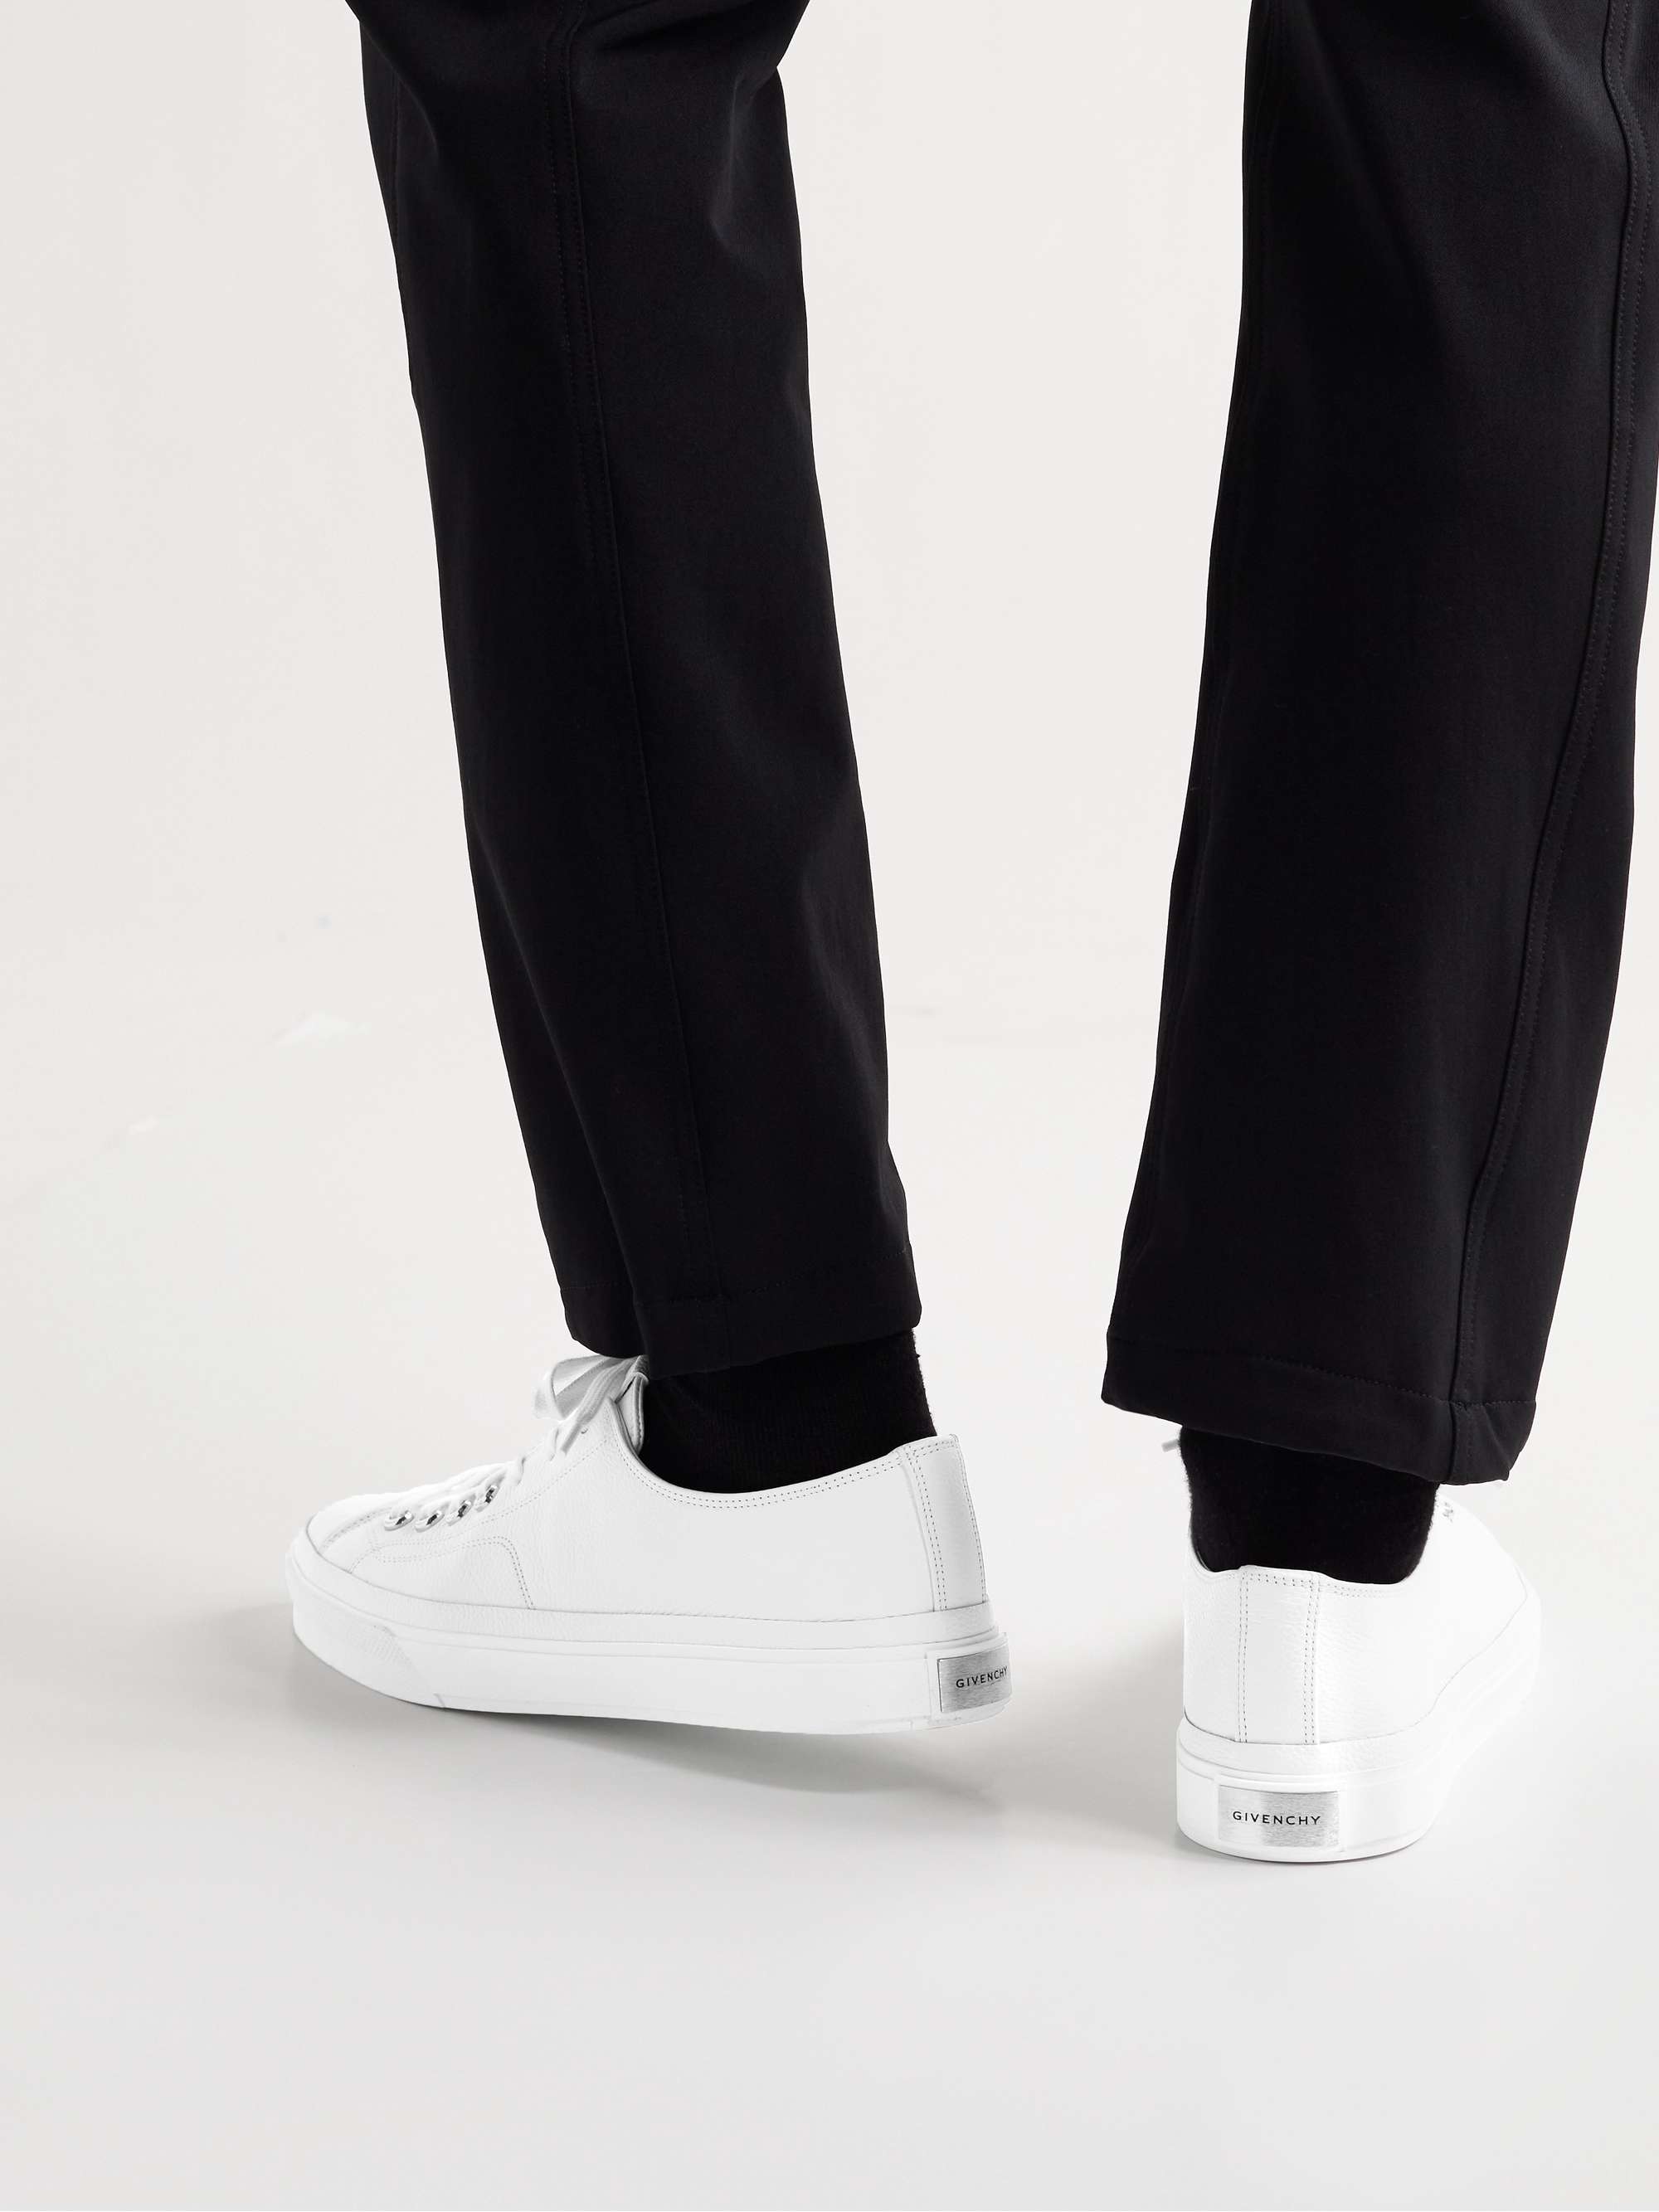 White + Chito City Sport Printed Leather Sneakers | GIVENCHY | MR 